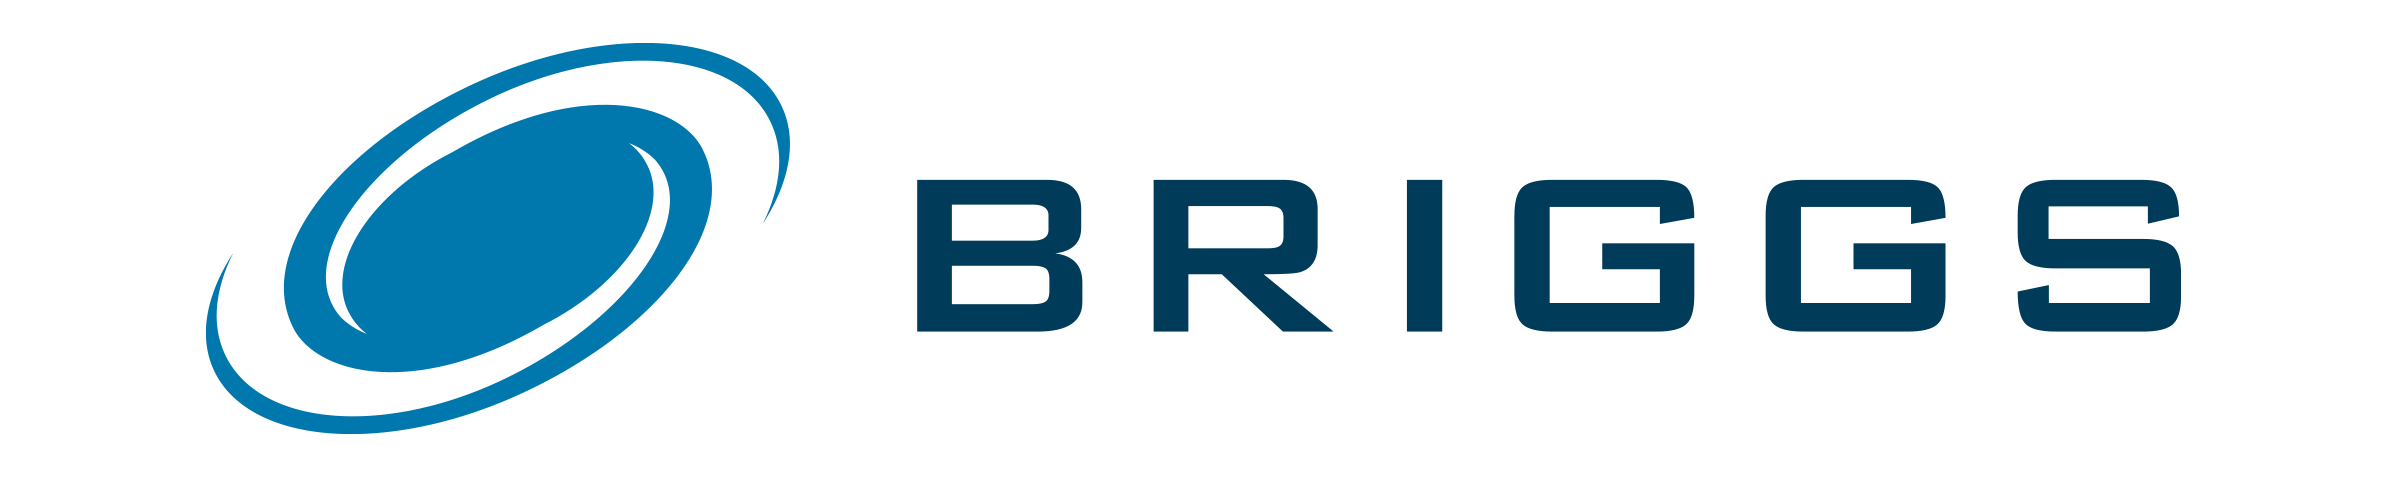 Briggs of Burton Plc becomes part of the corporate group.